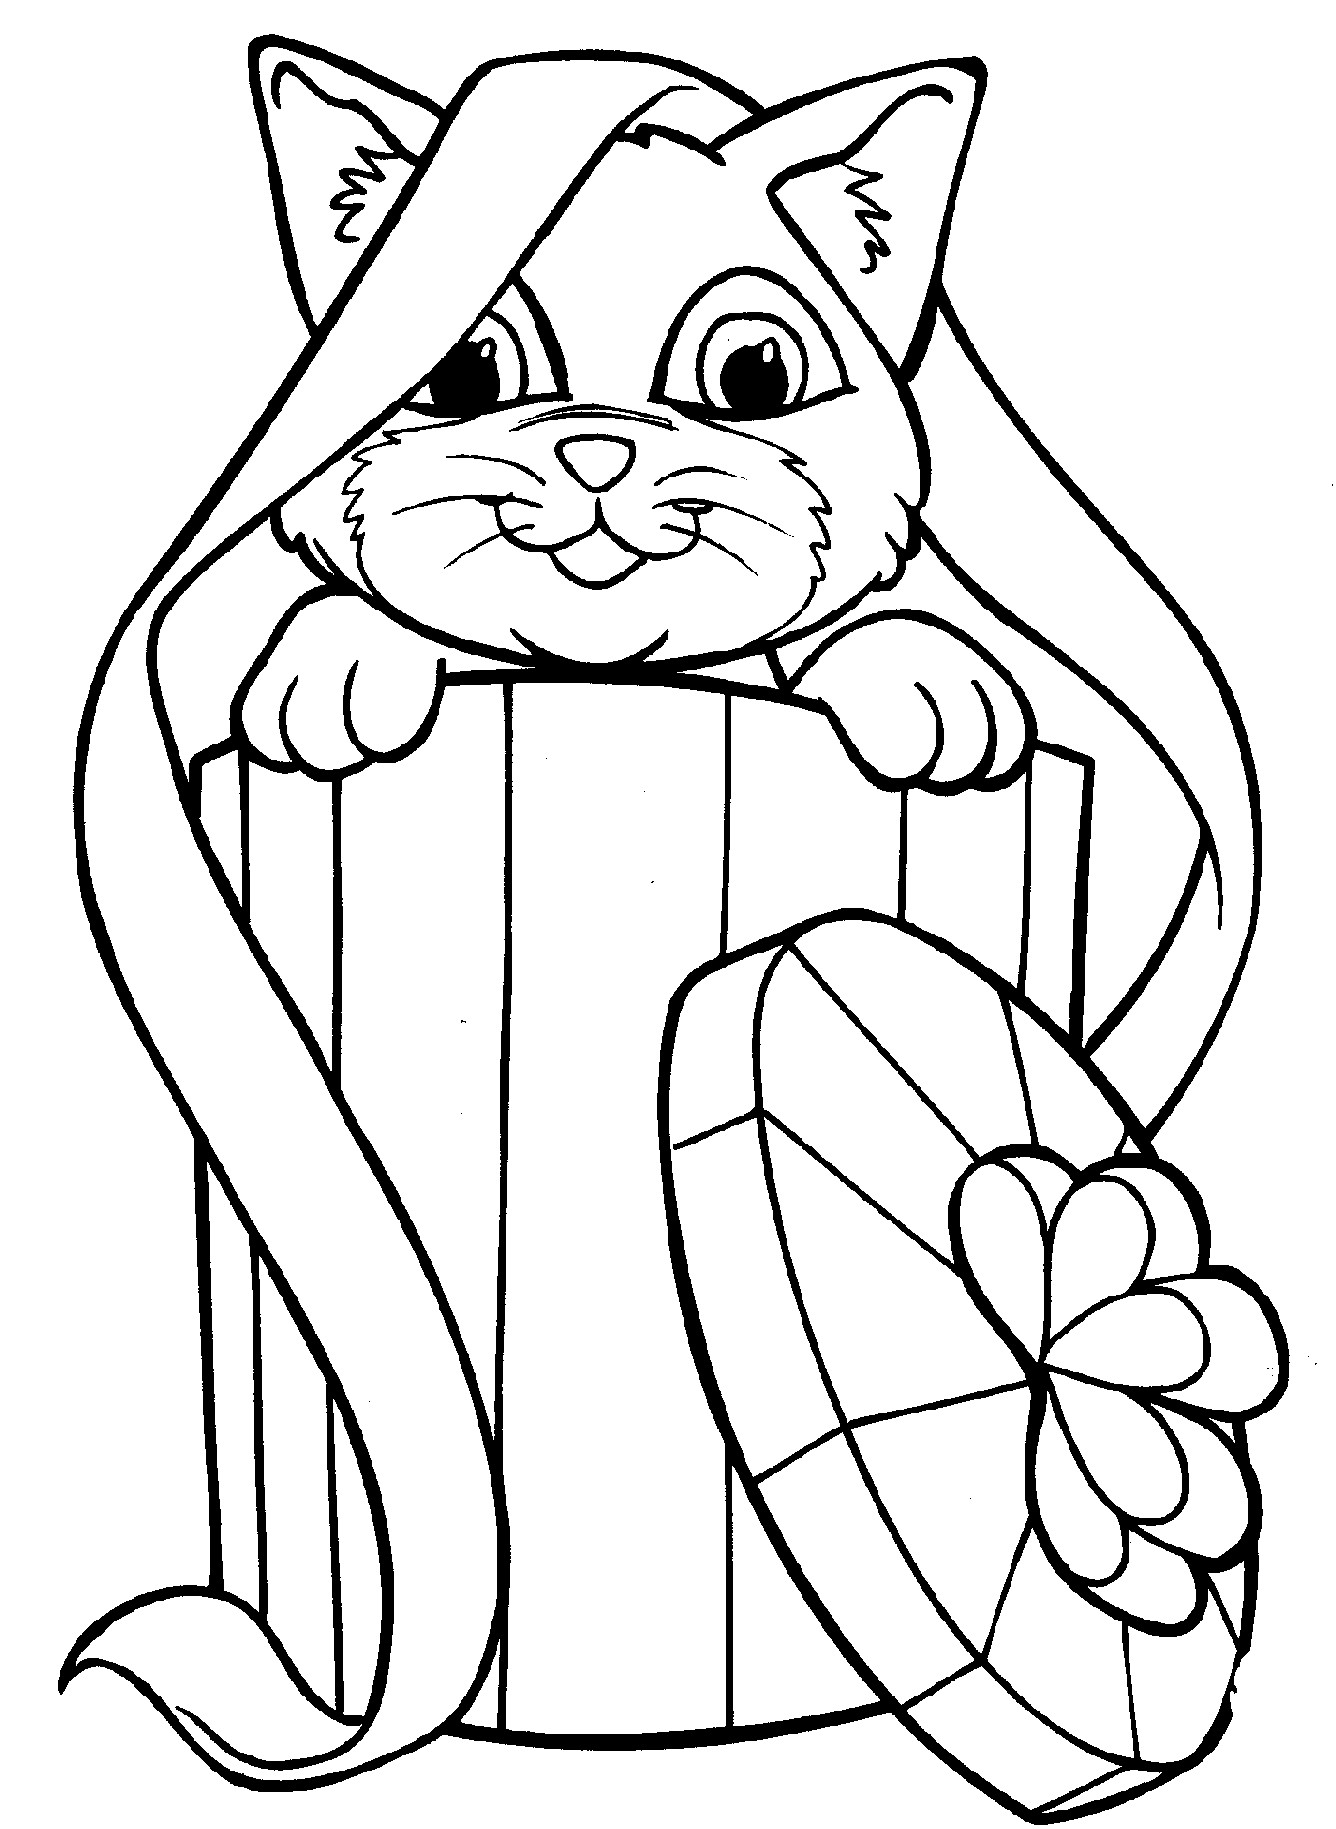 Kitty Coloring Pages
 Free Printable Kitten Coloring Pages For Kids Best